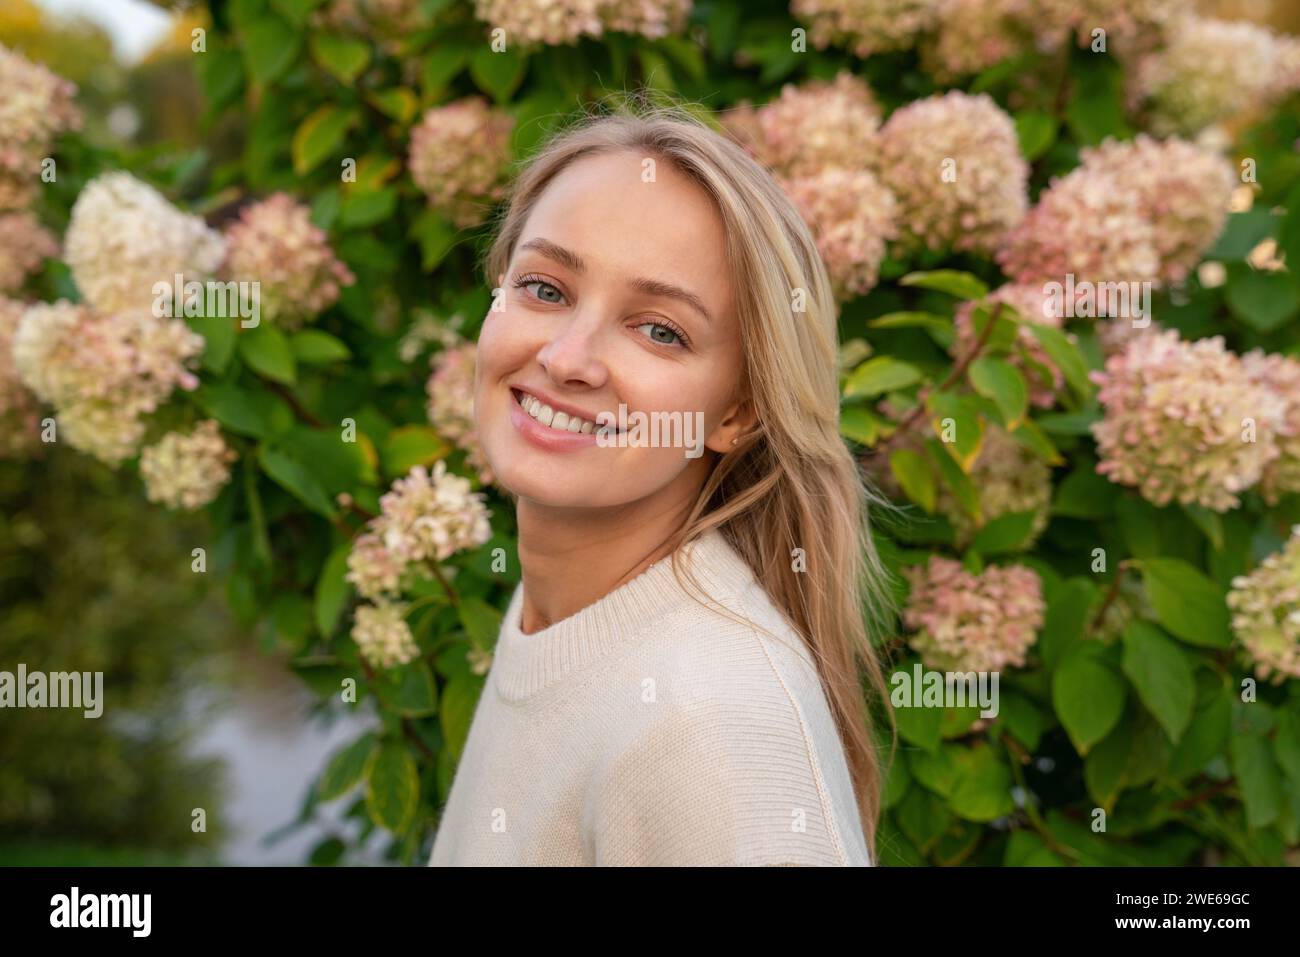 Happy blond woman in front of flowering plant Stock Photo